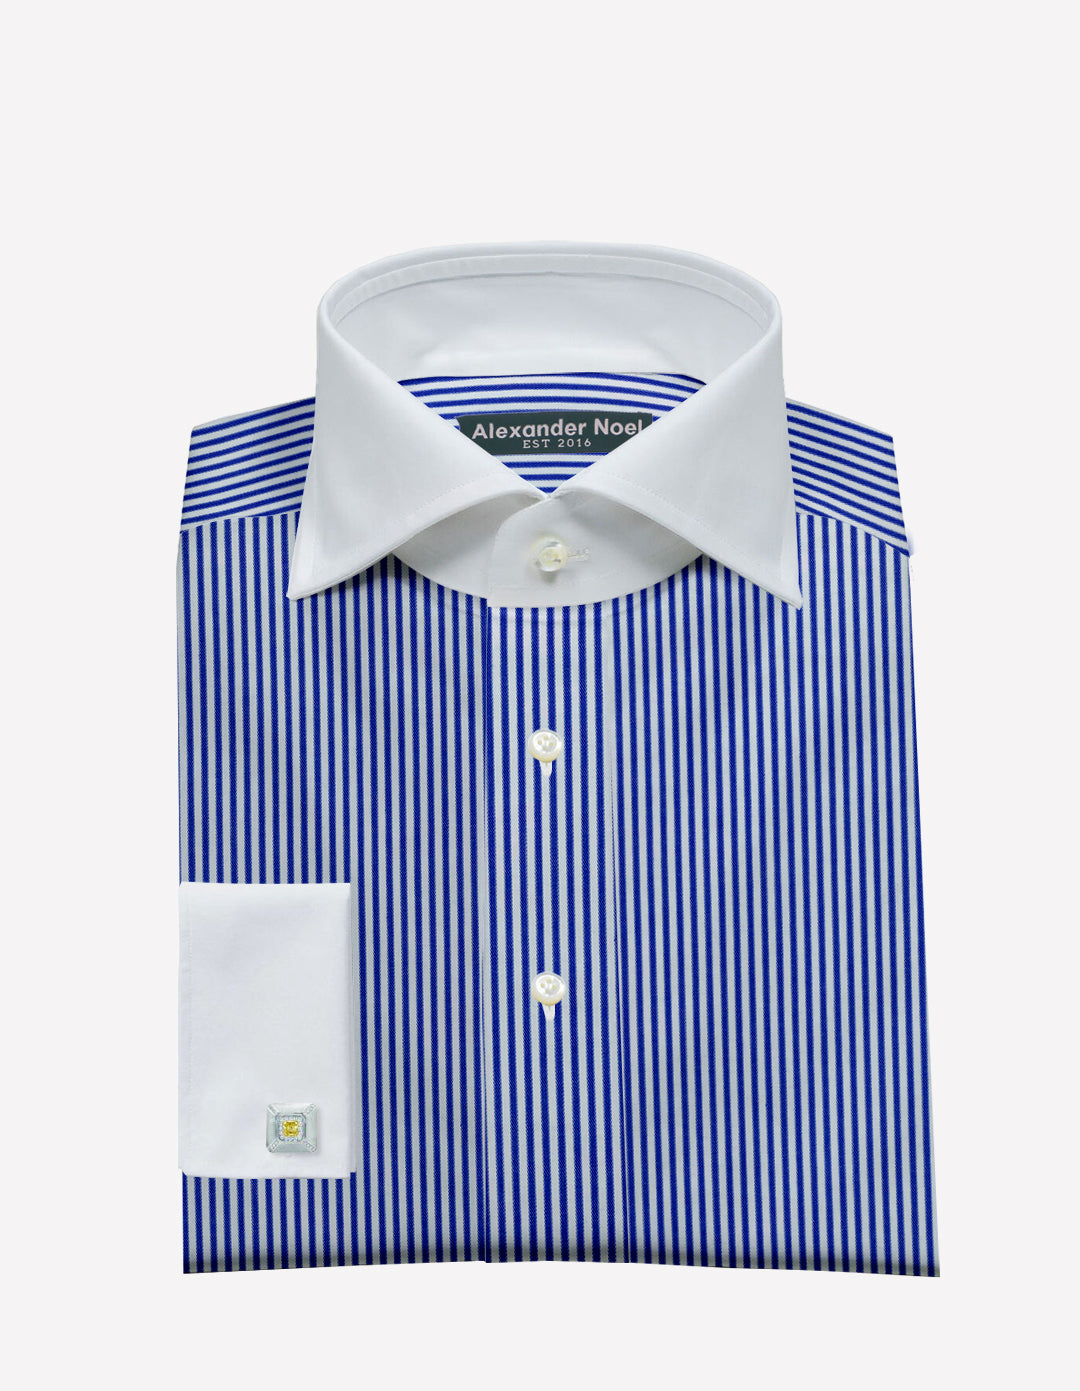 Blue Stripes with White Collar and Cuffs